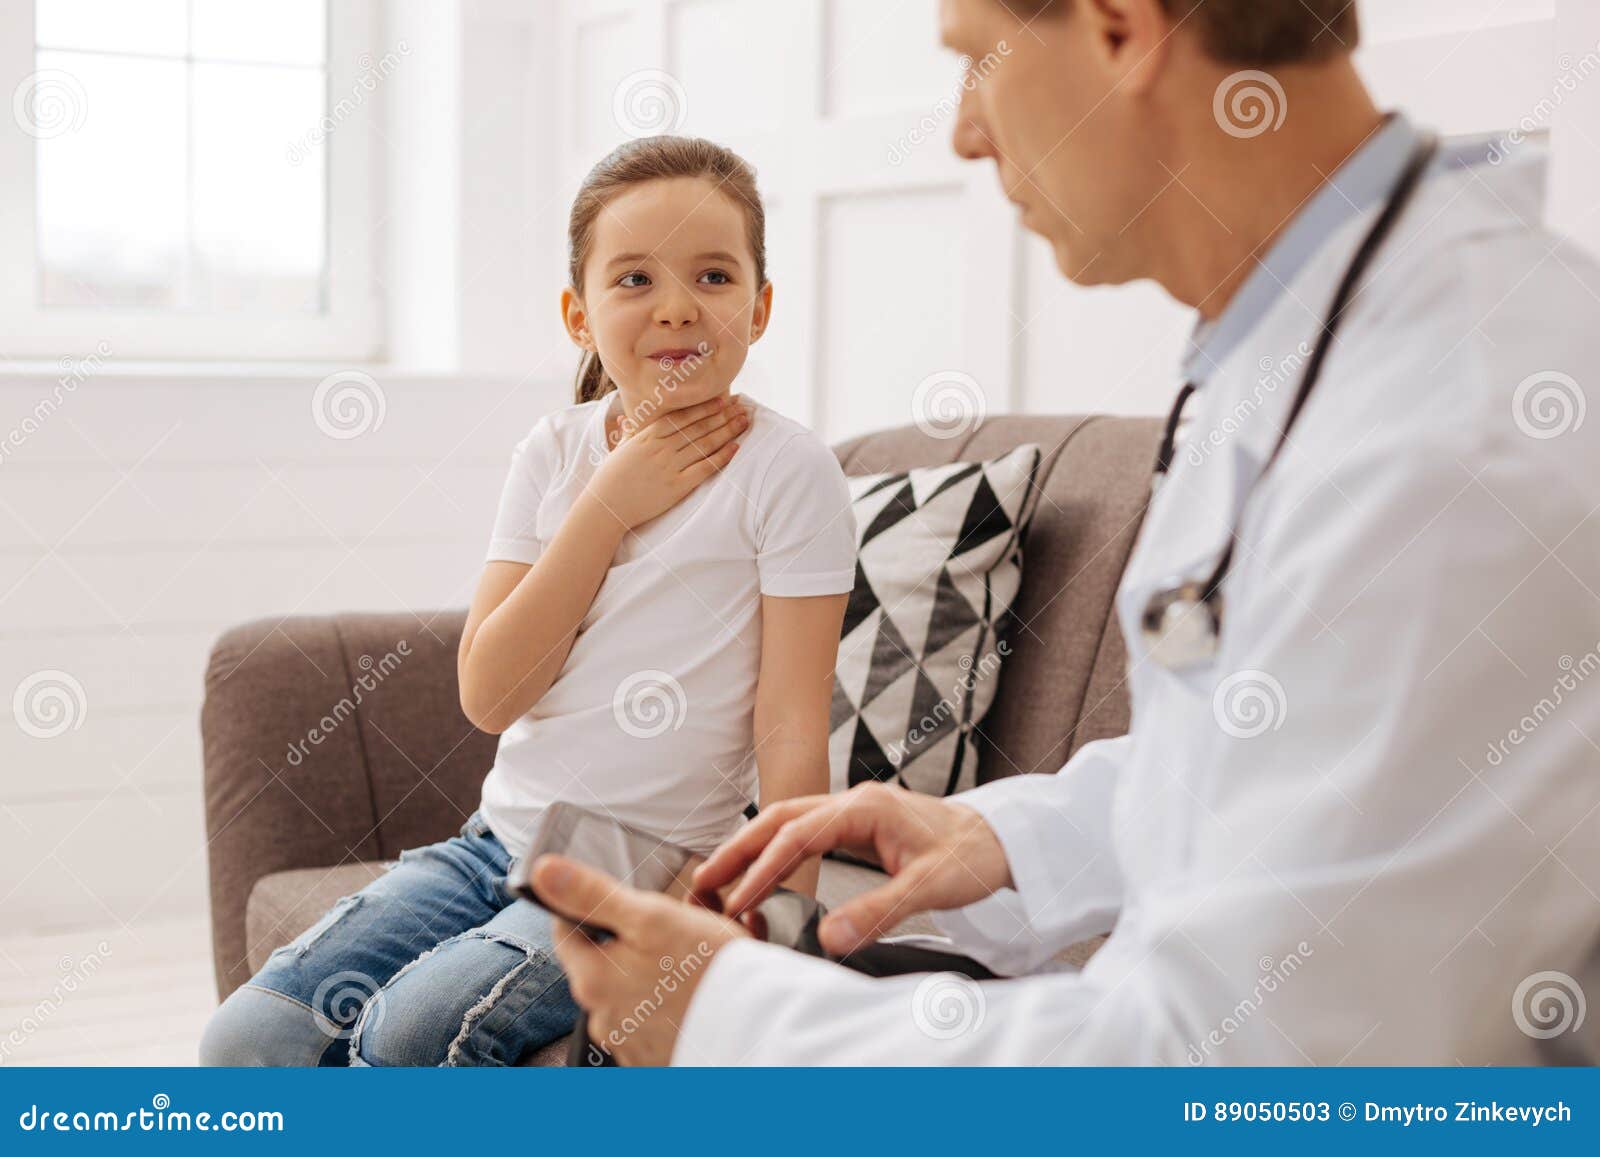 pay visit to doctor